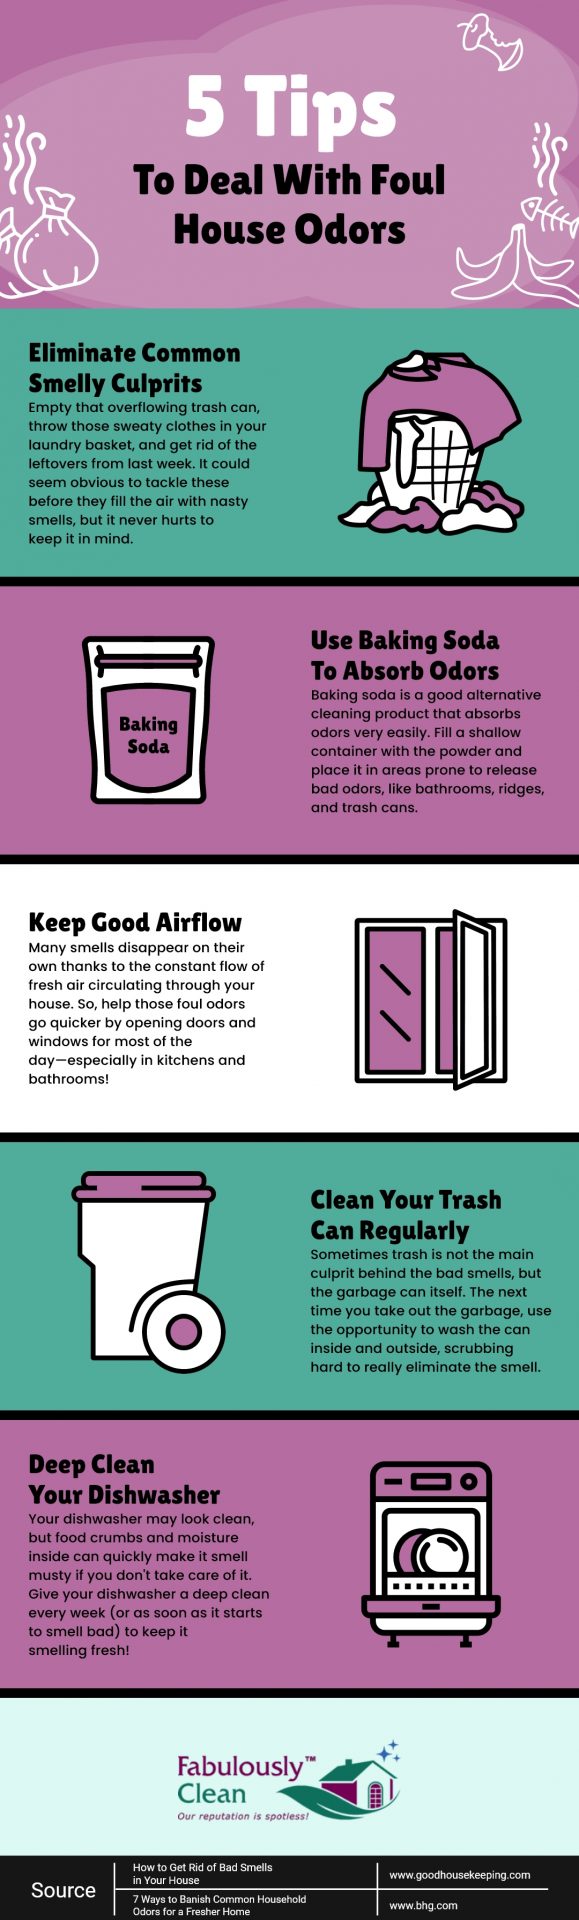 Fabulously Clean 5 Tips To Deal With Foul House Odors 